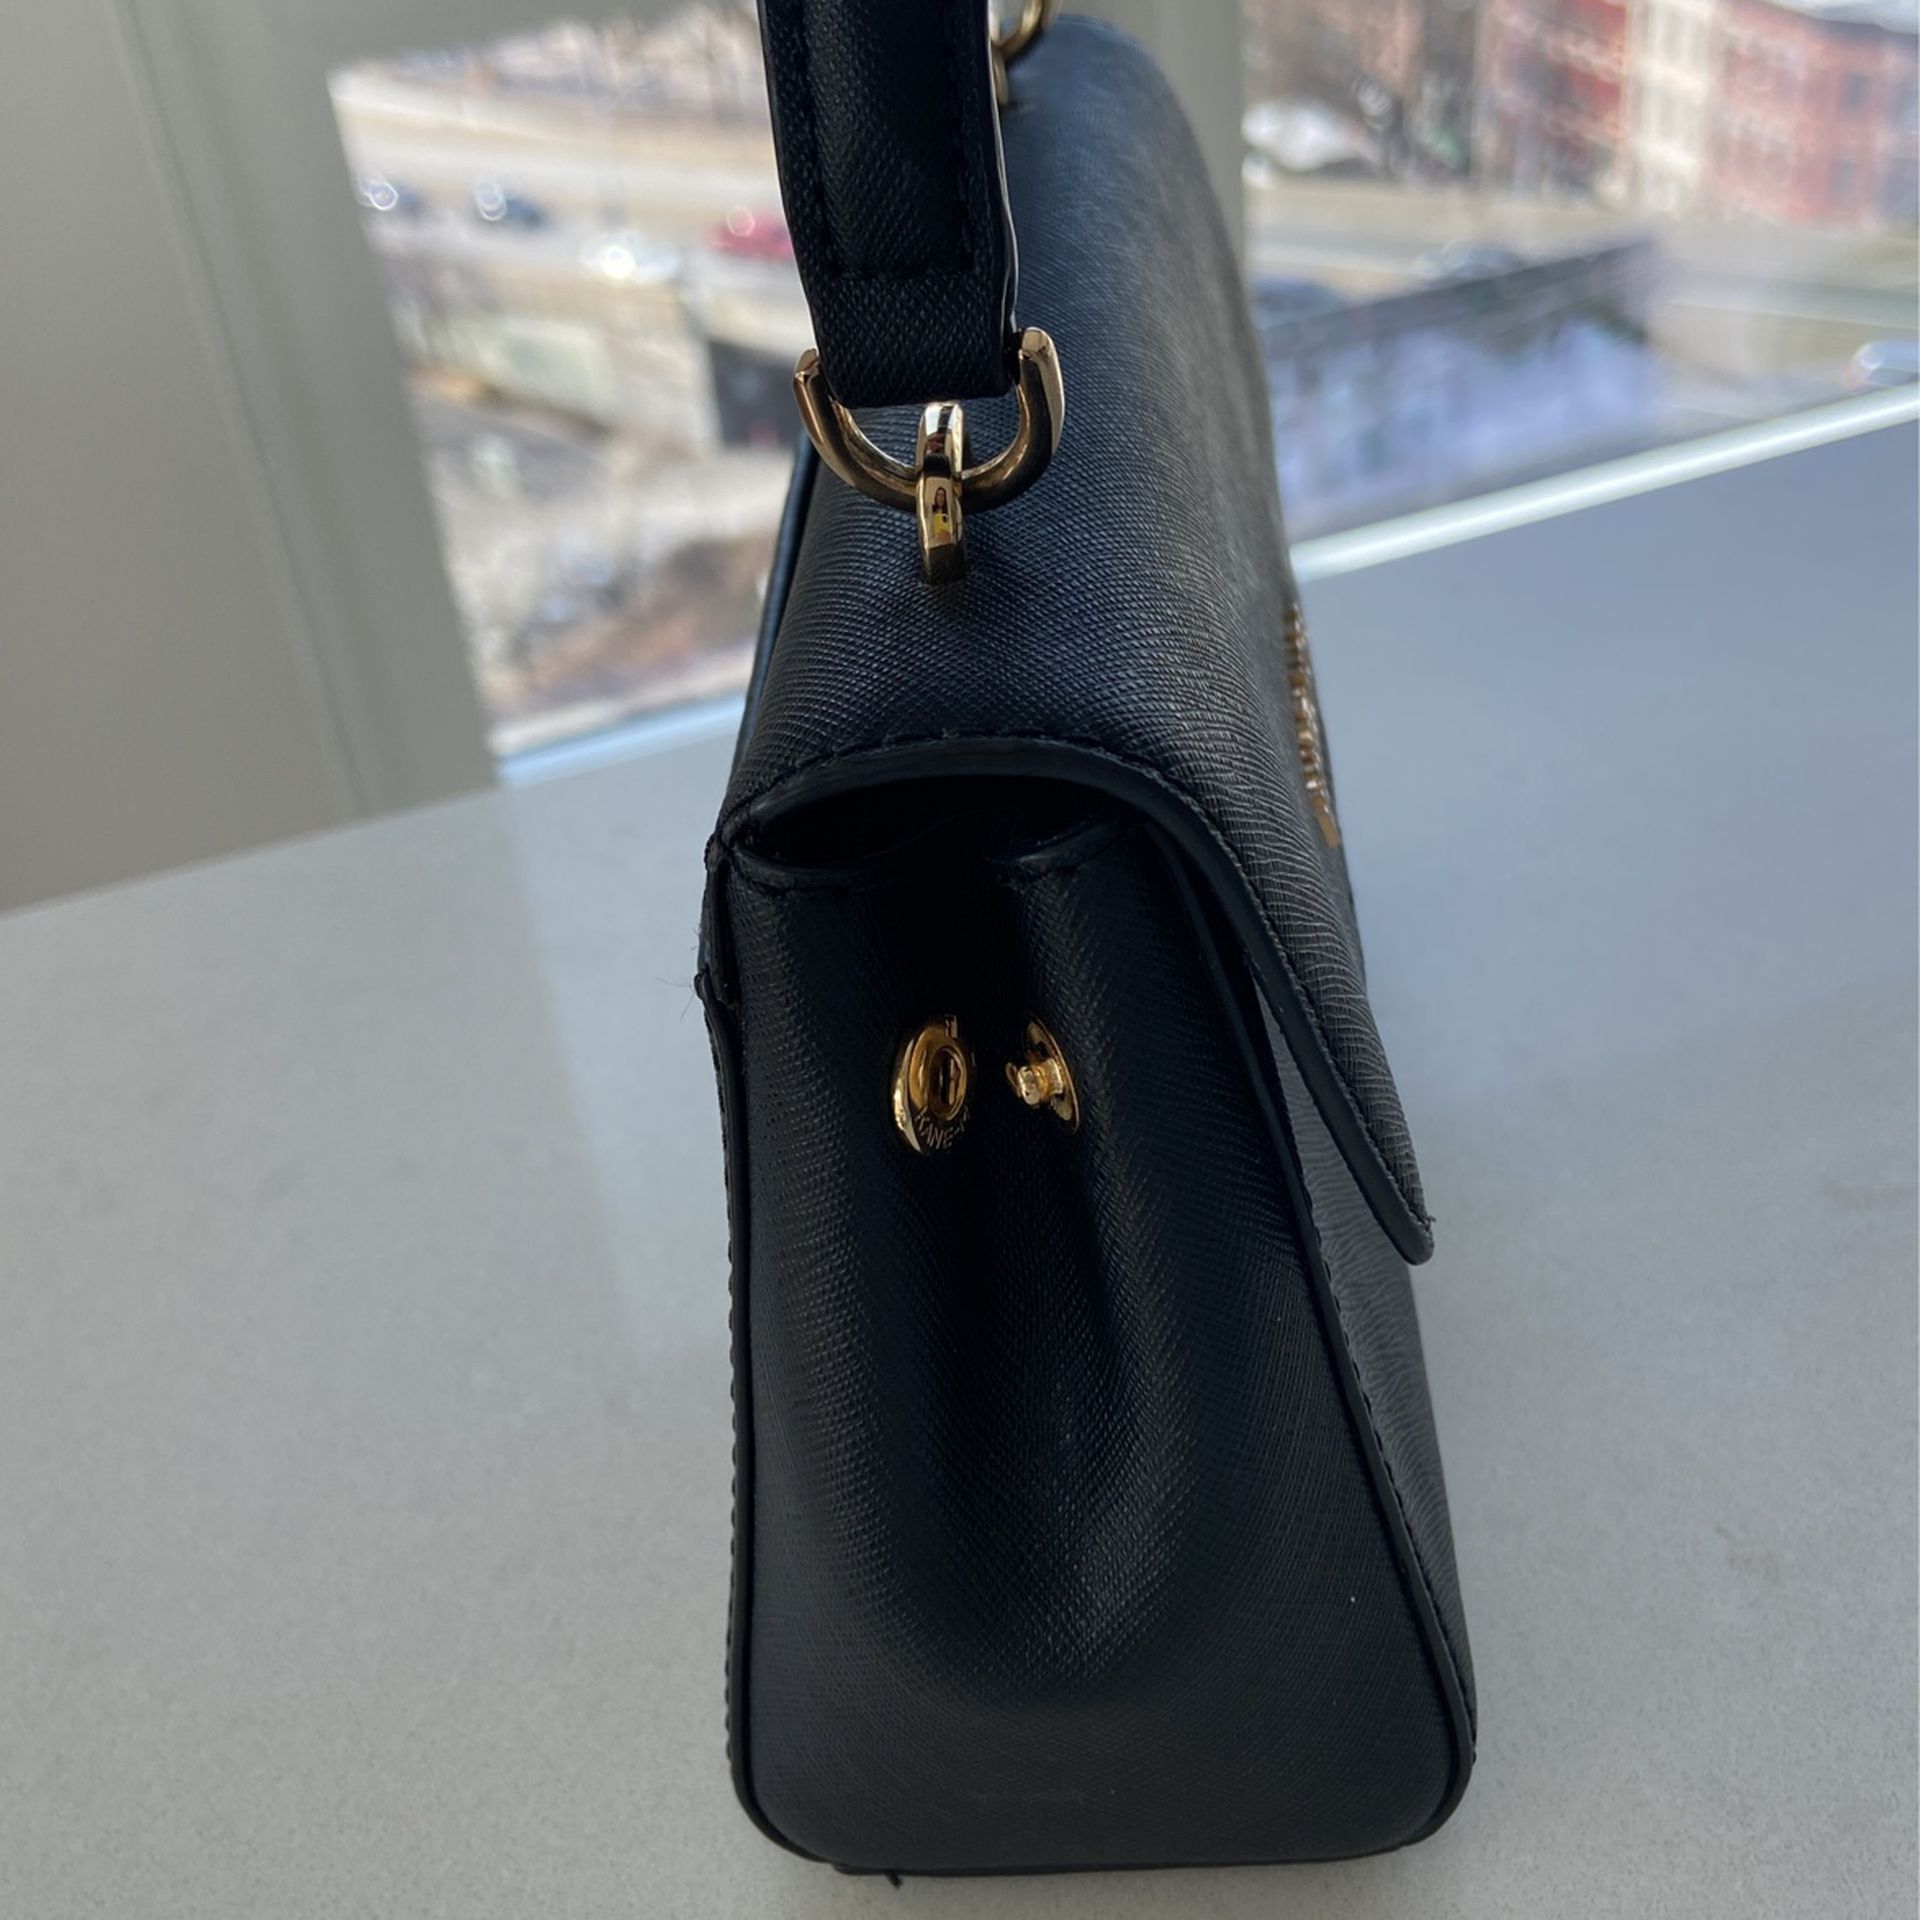 Michael Kors Selma Mini Messenger Bag for Sale in Queens, NY - OfferUp